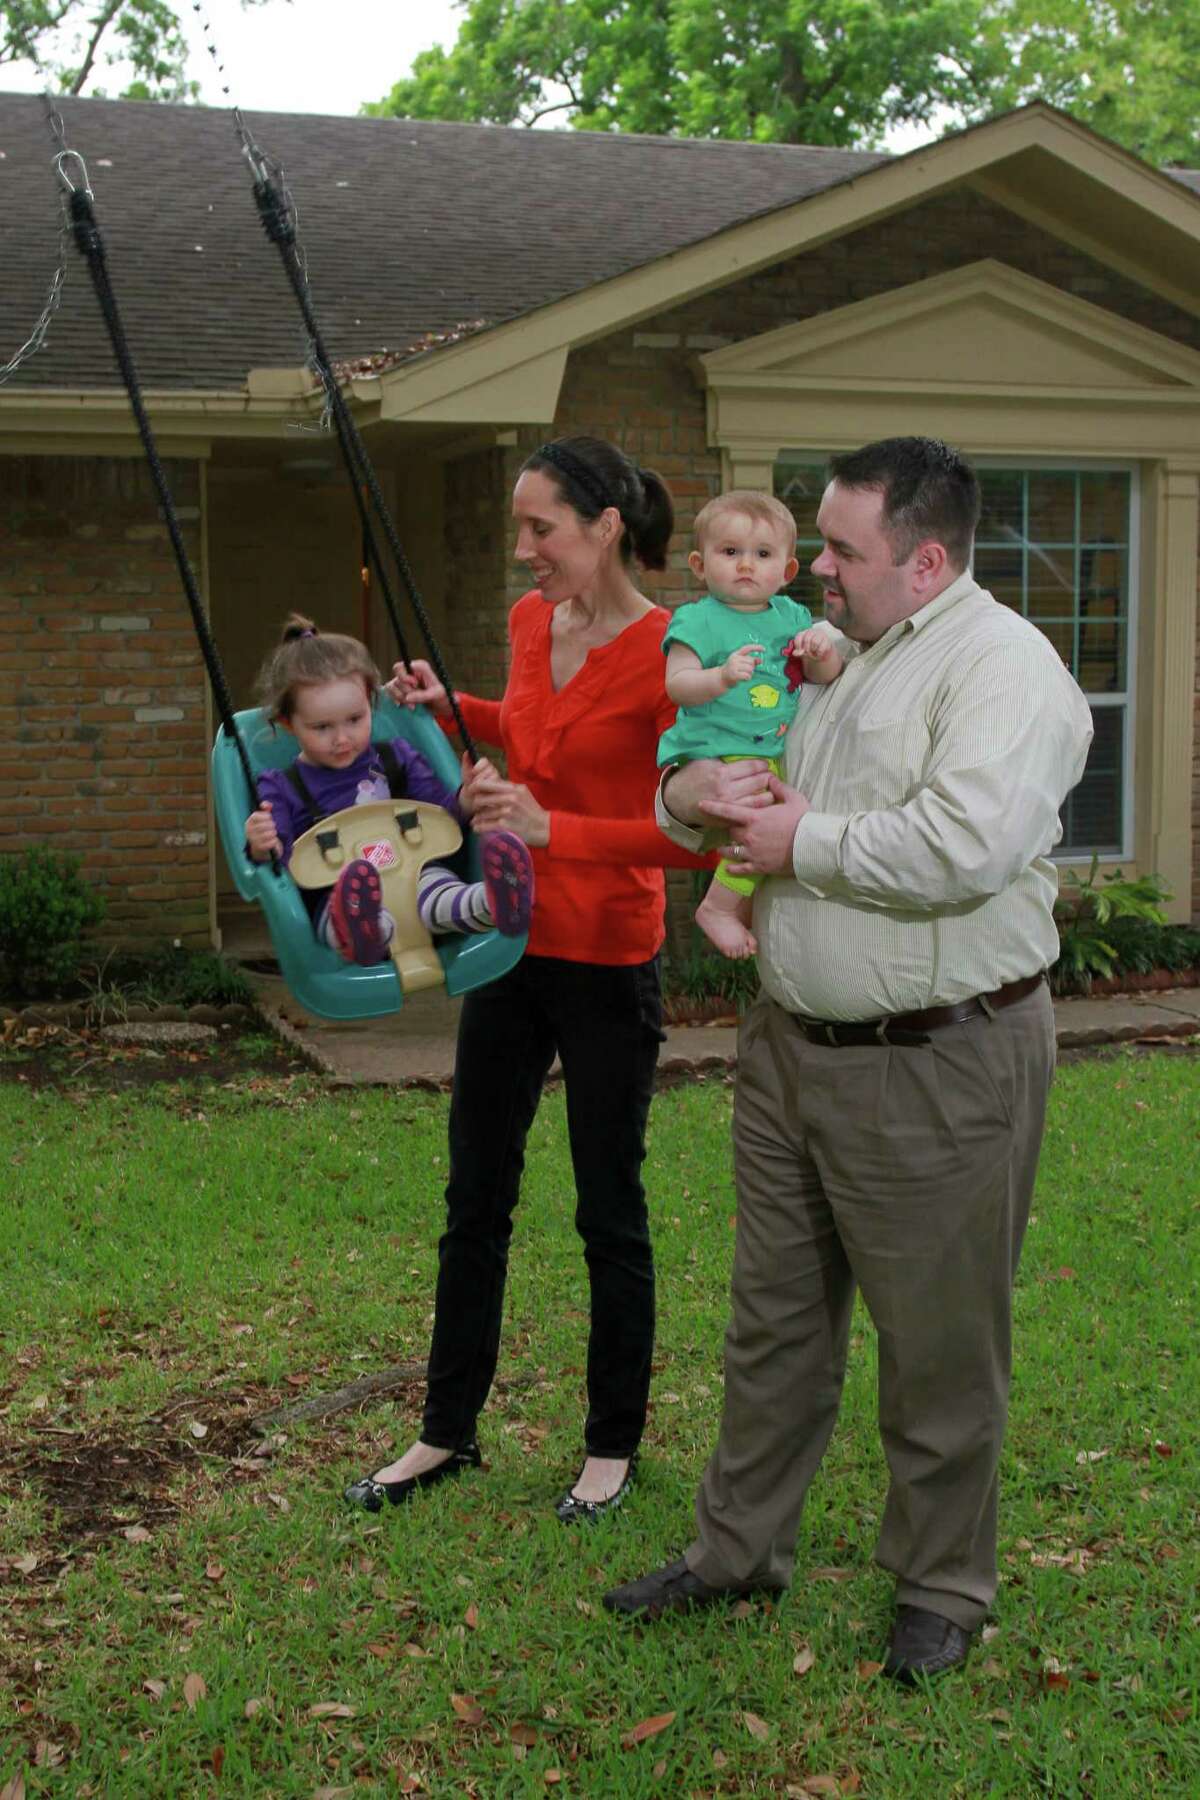 Lacey and Jason Dobrolecki and their children, Kalli, 2½, and Malina, 10 months, are renting as they wait to buy a home in Meyerland close to Jason's workplace.